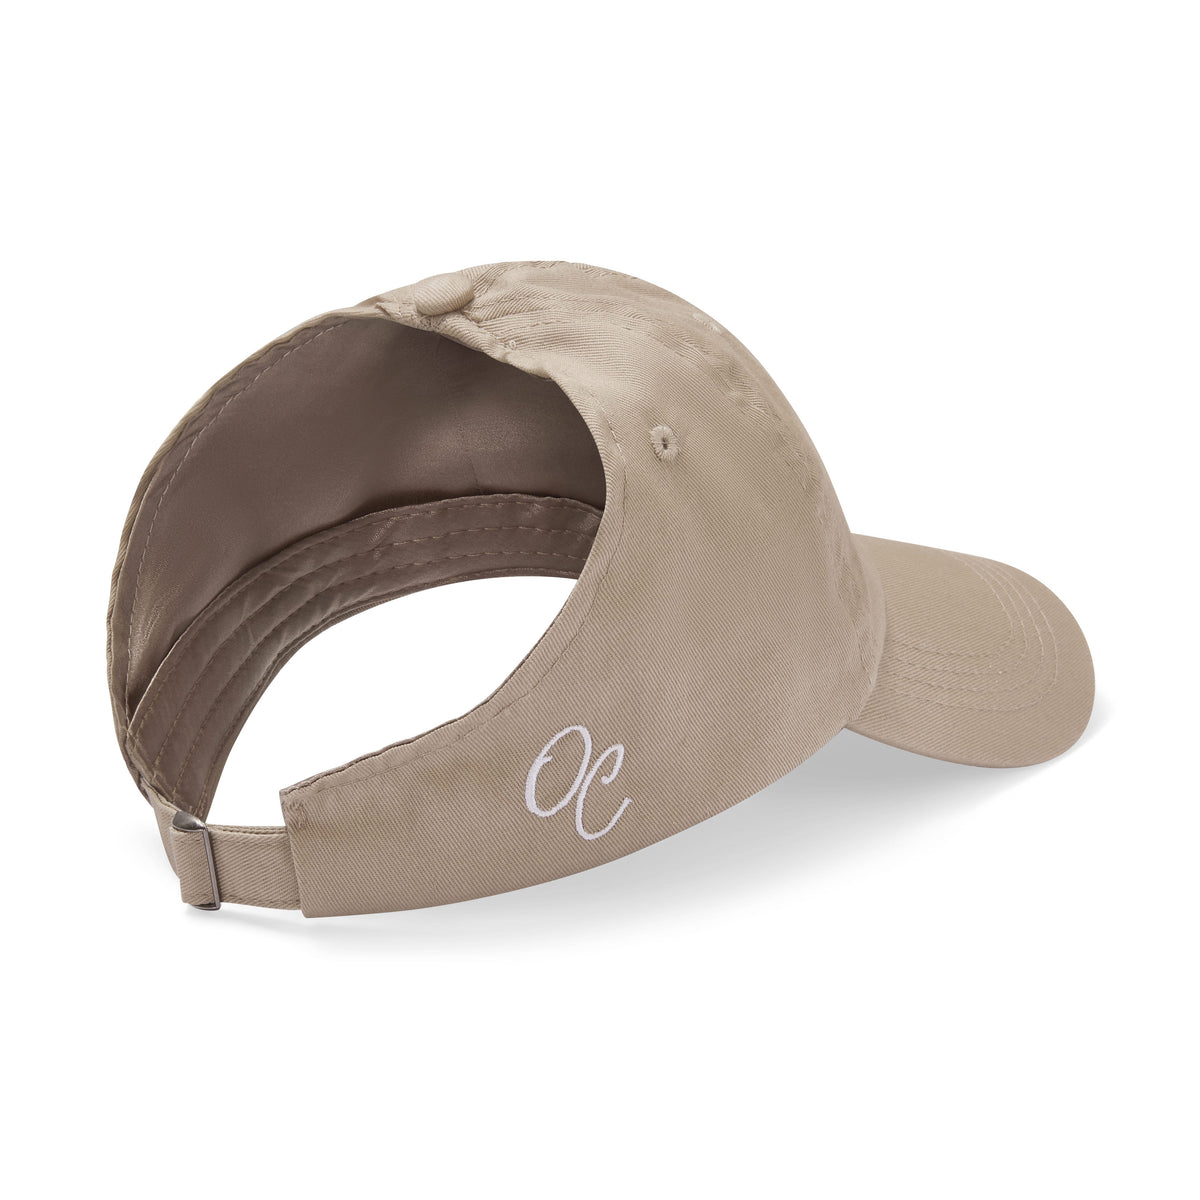 Only Curls Satin Lined Baseball Hat (with open back) - Beige - Only Curls